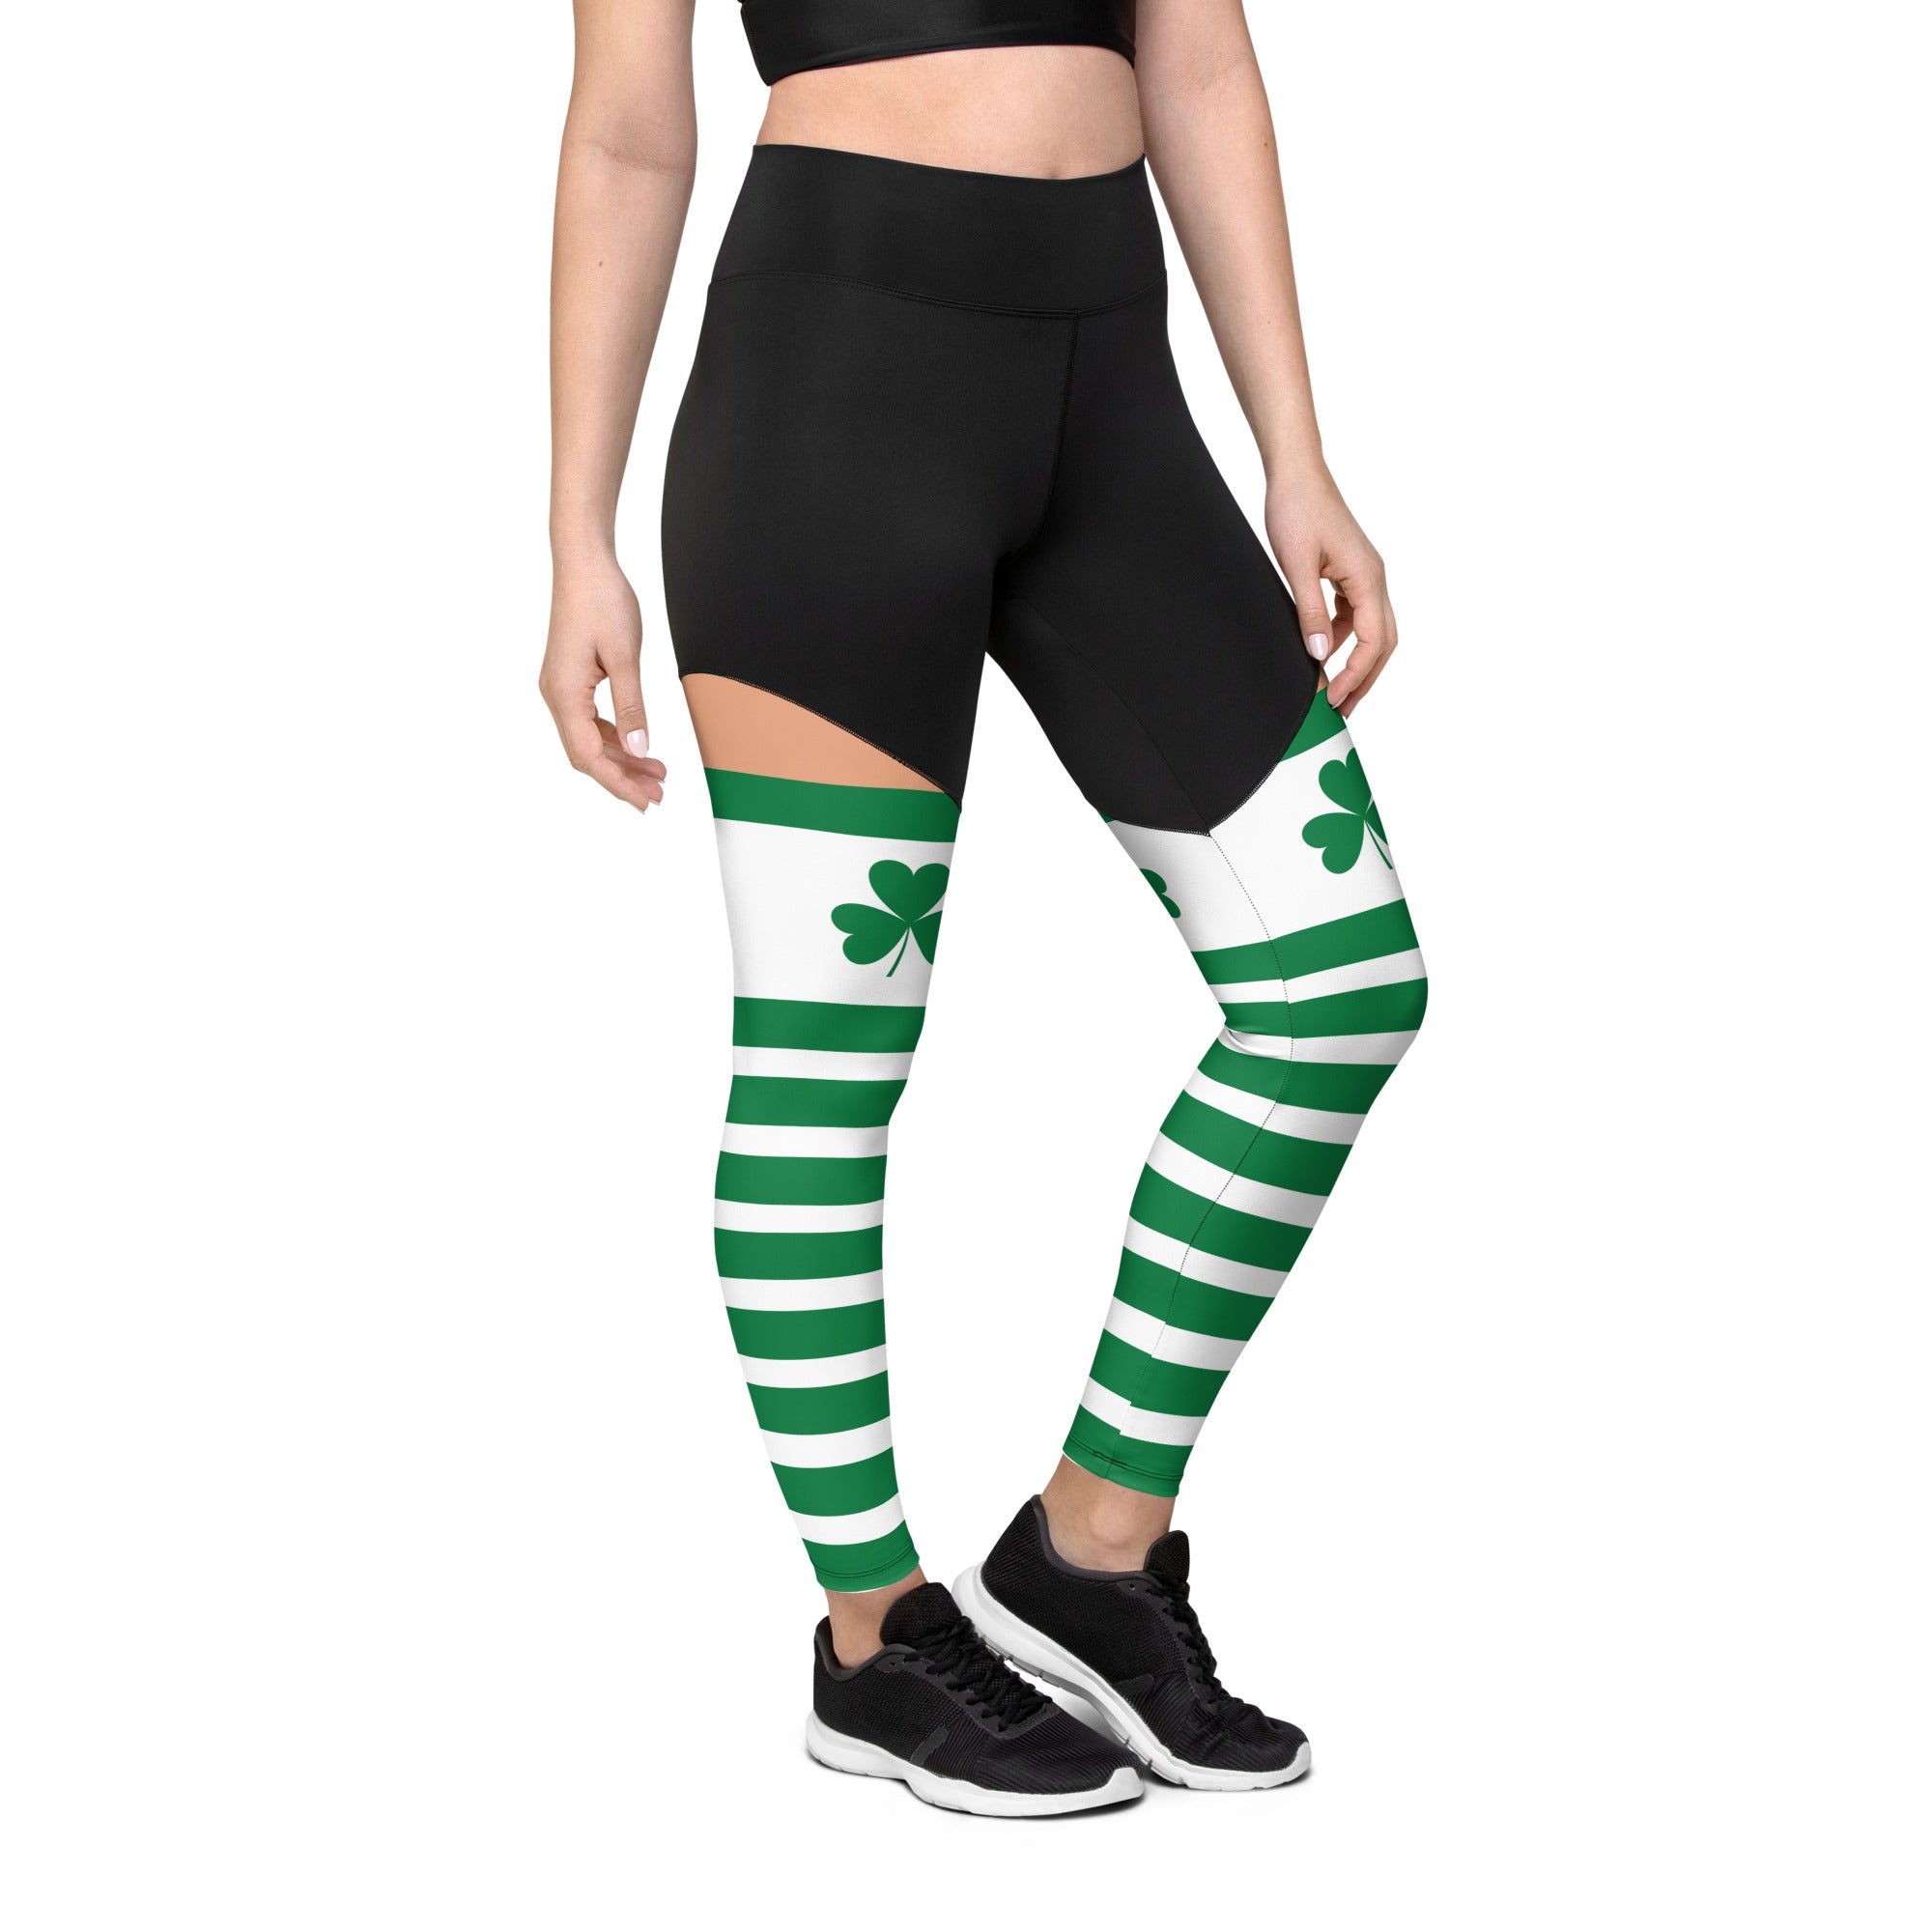 St. Patrick's Day Stockings Compression Leggings